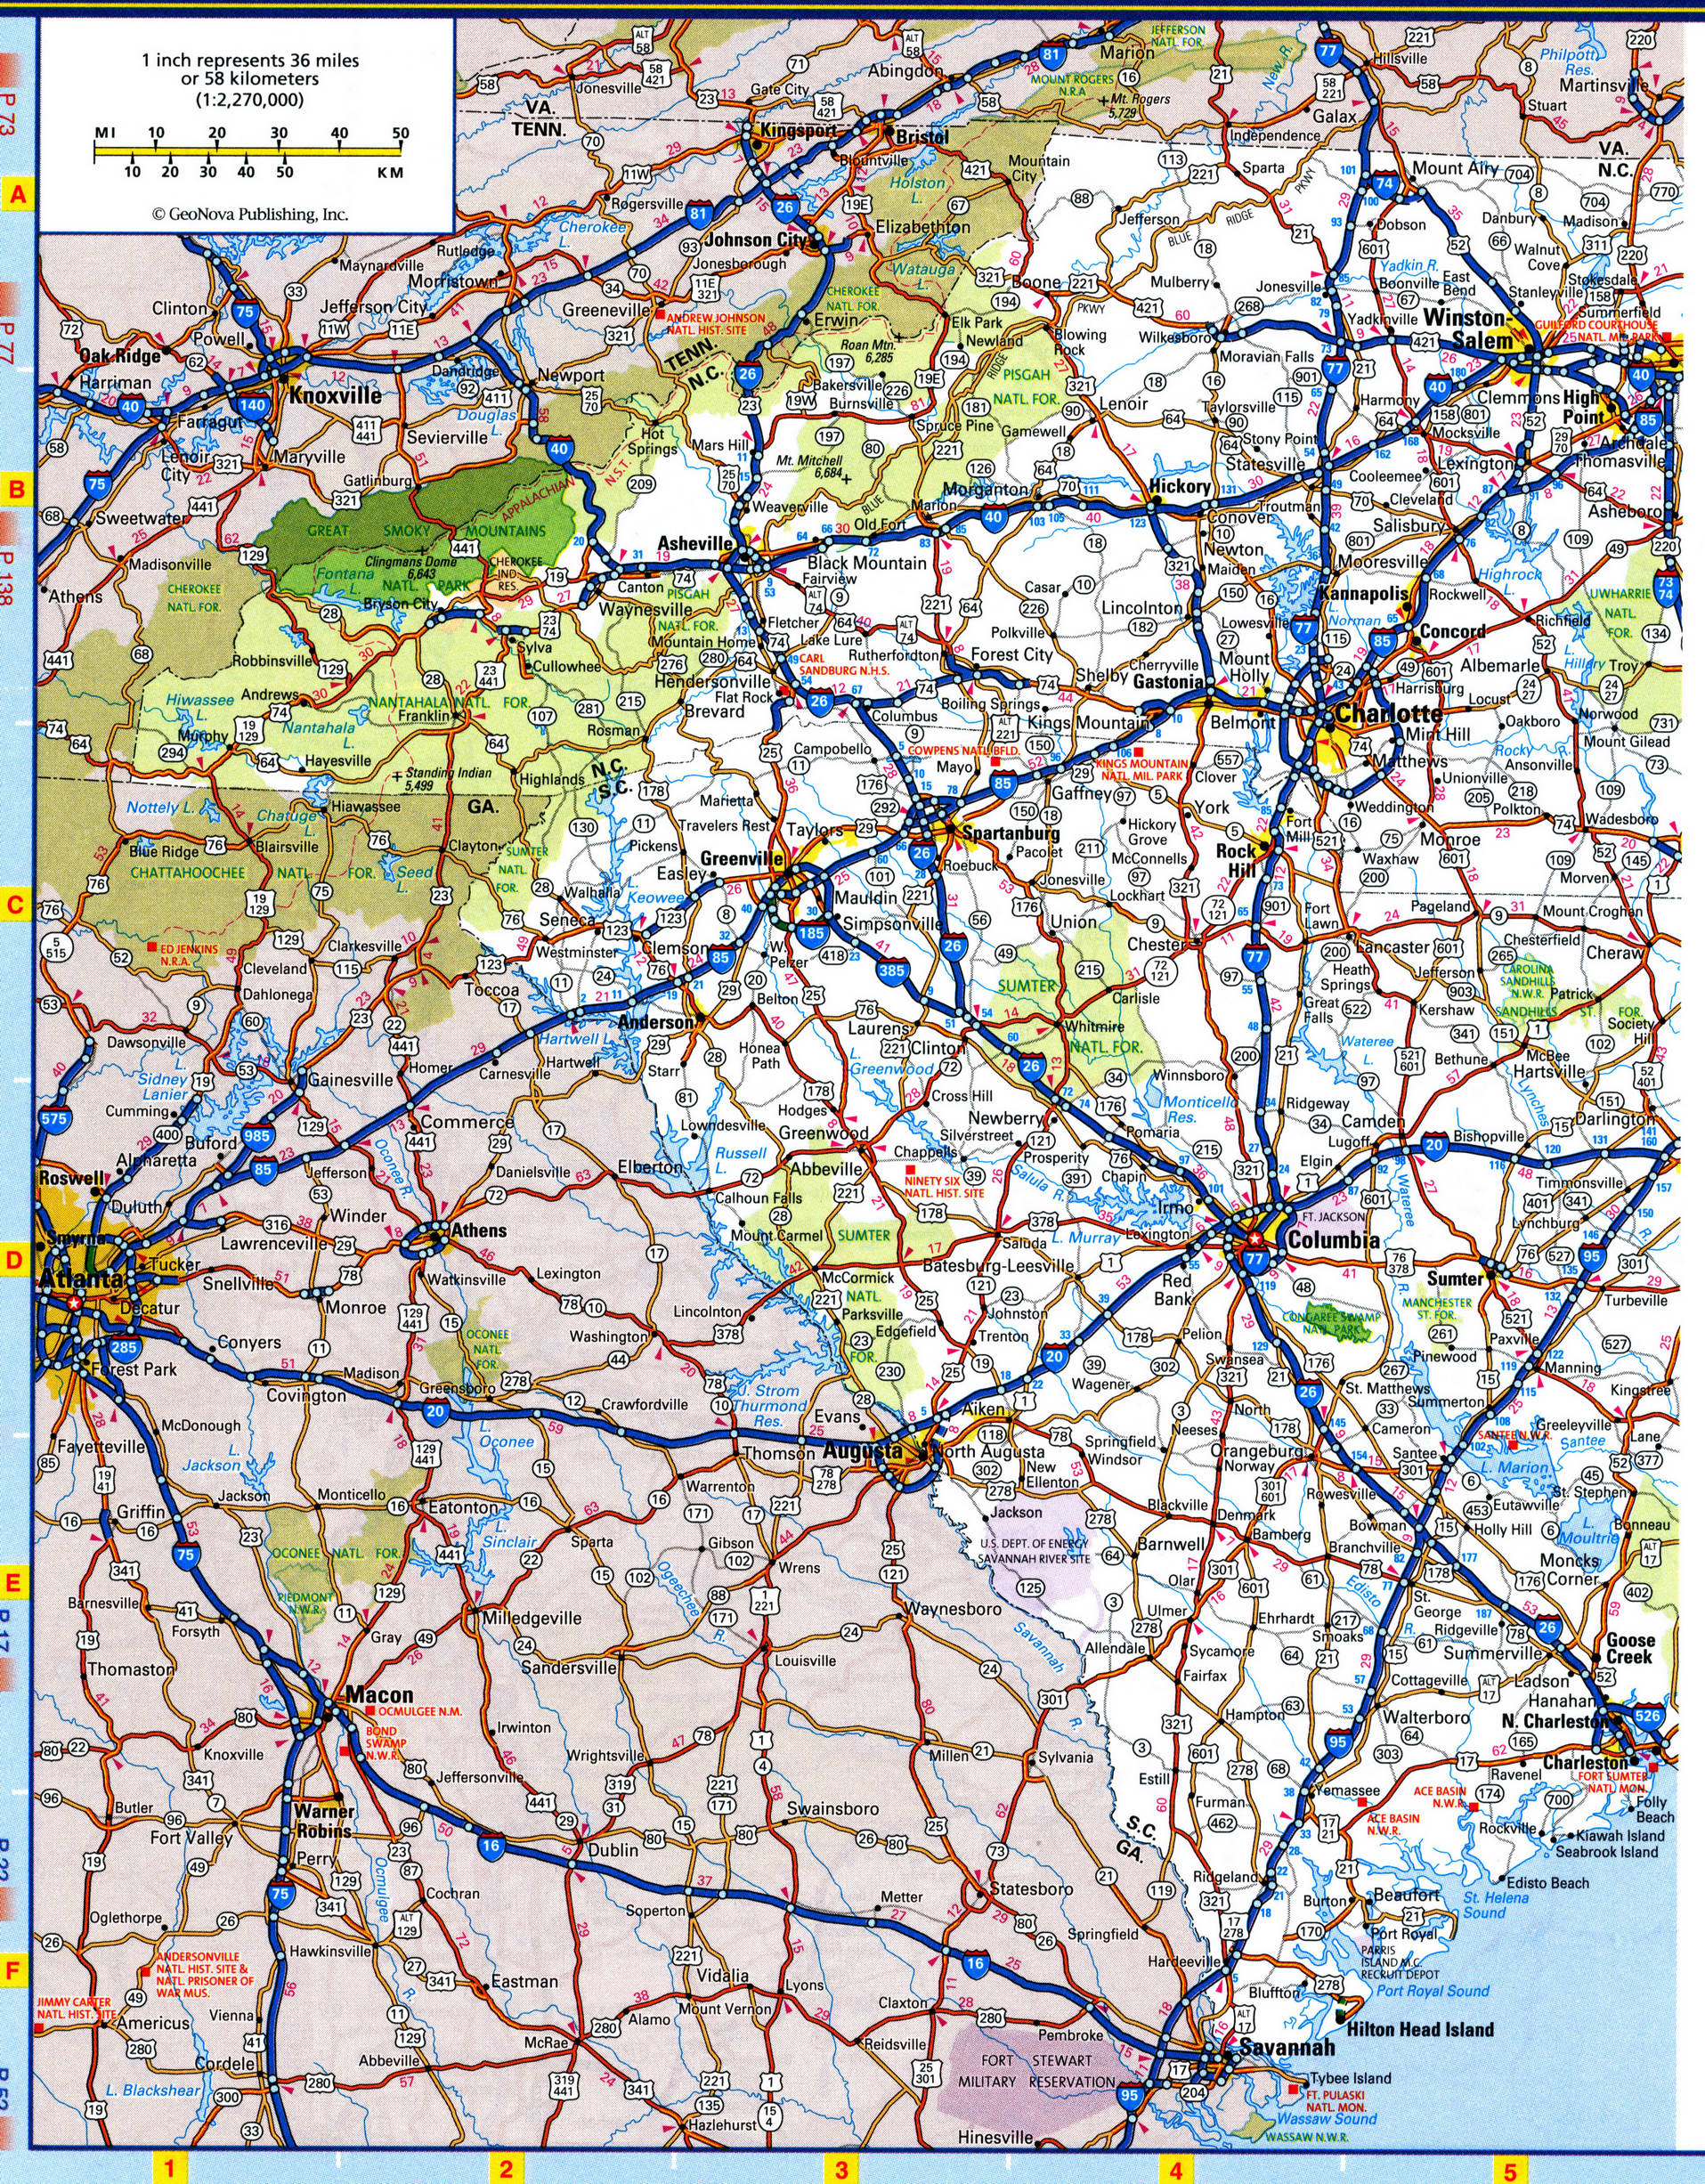 Washington D C Area Roads And Highways Map Roads And